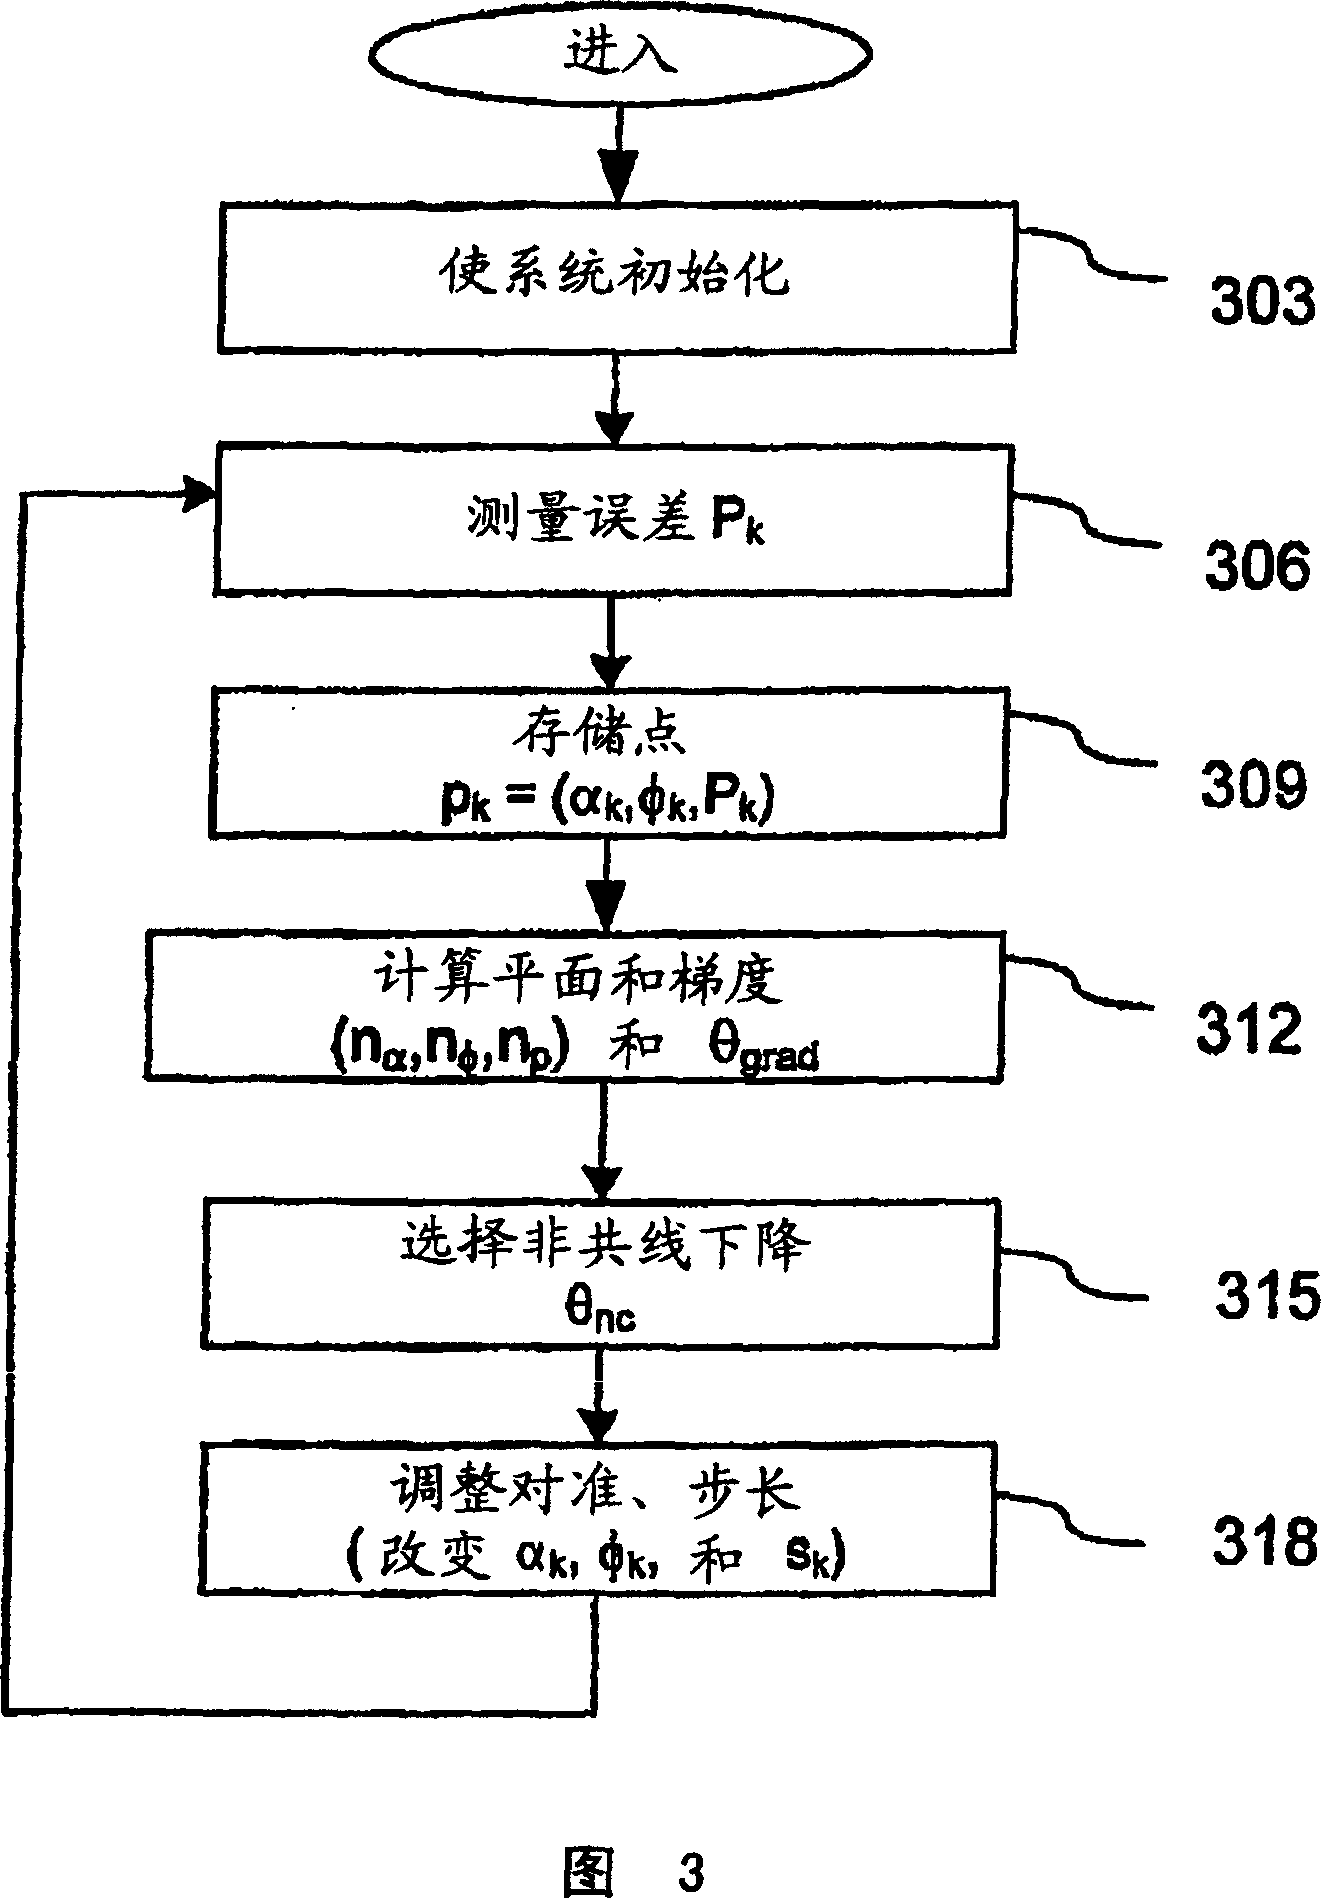 System and method for control of loop alignment in adaptive feed forward amplifiers